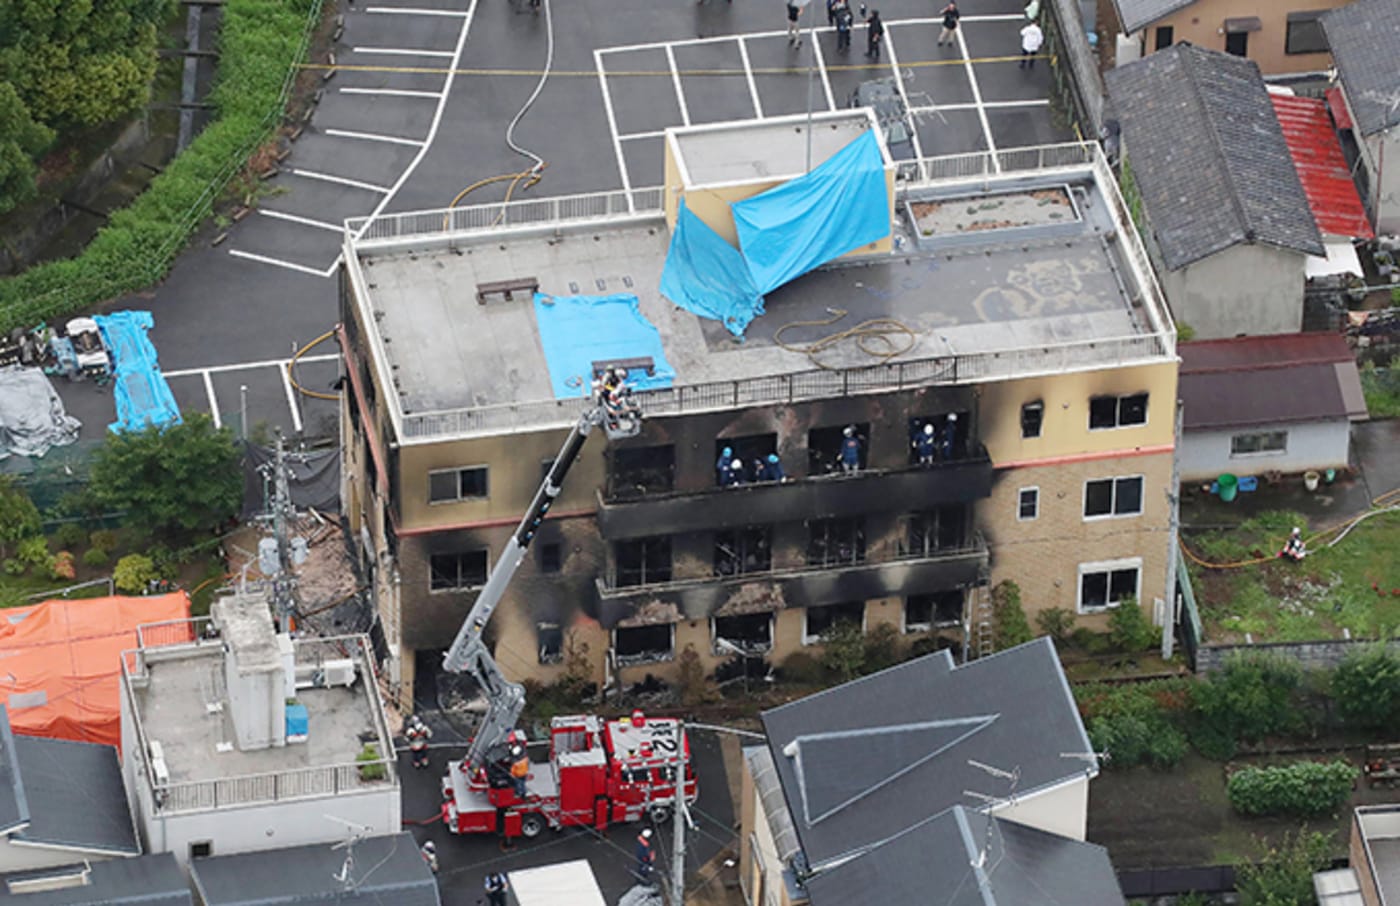 33 Confirmed Dead in Suspected Arson Attack on Japanese Anime Studio |  Complex